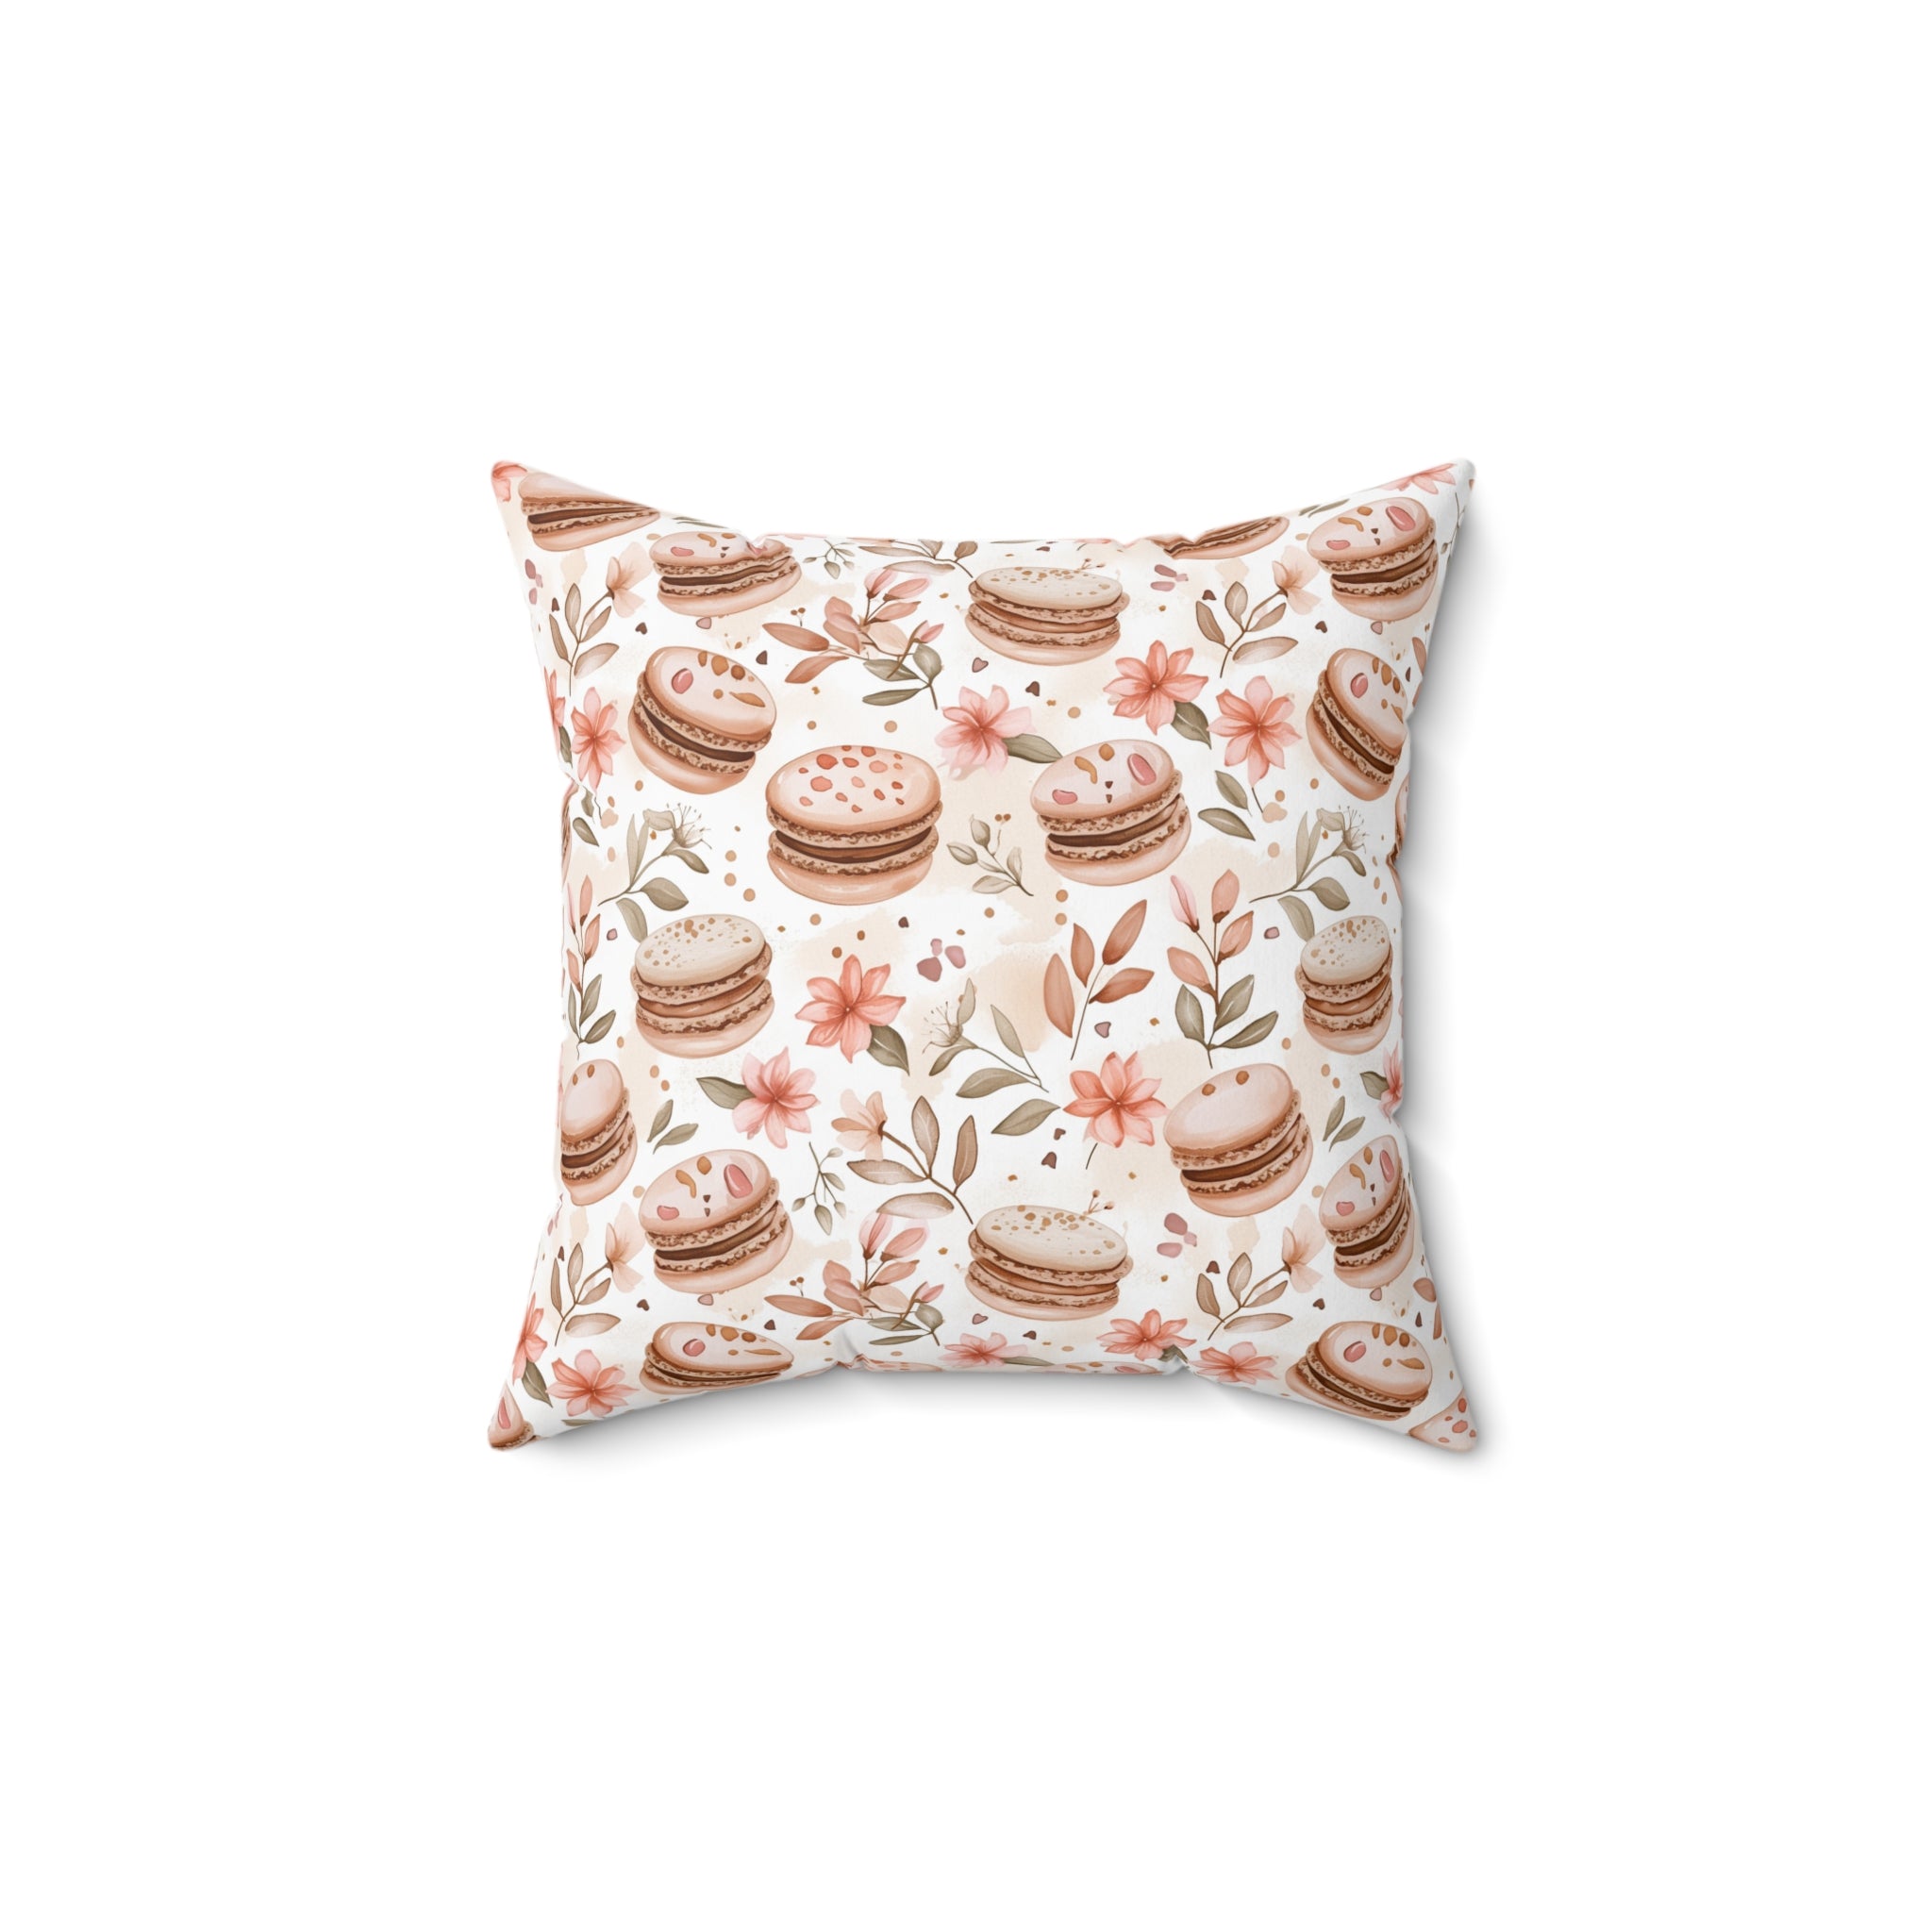 <p class="p1">Indulge in sweet dreams as you rest your head on this macaroon-inspired pillow. Its inviting design and softness make it the perfect companion for relaxation and comfort.</p> <p class="p1">&nbsp;</p>